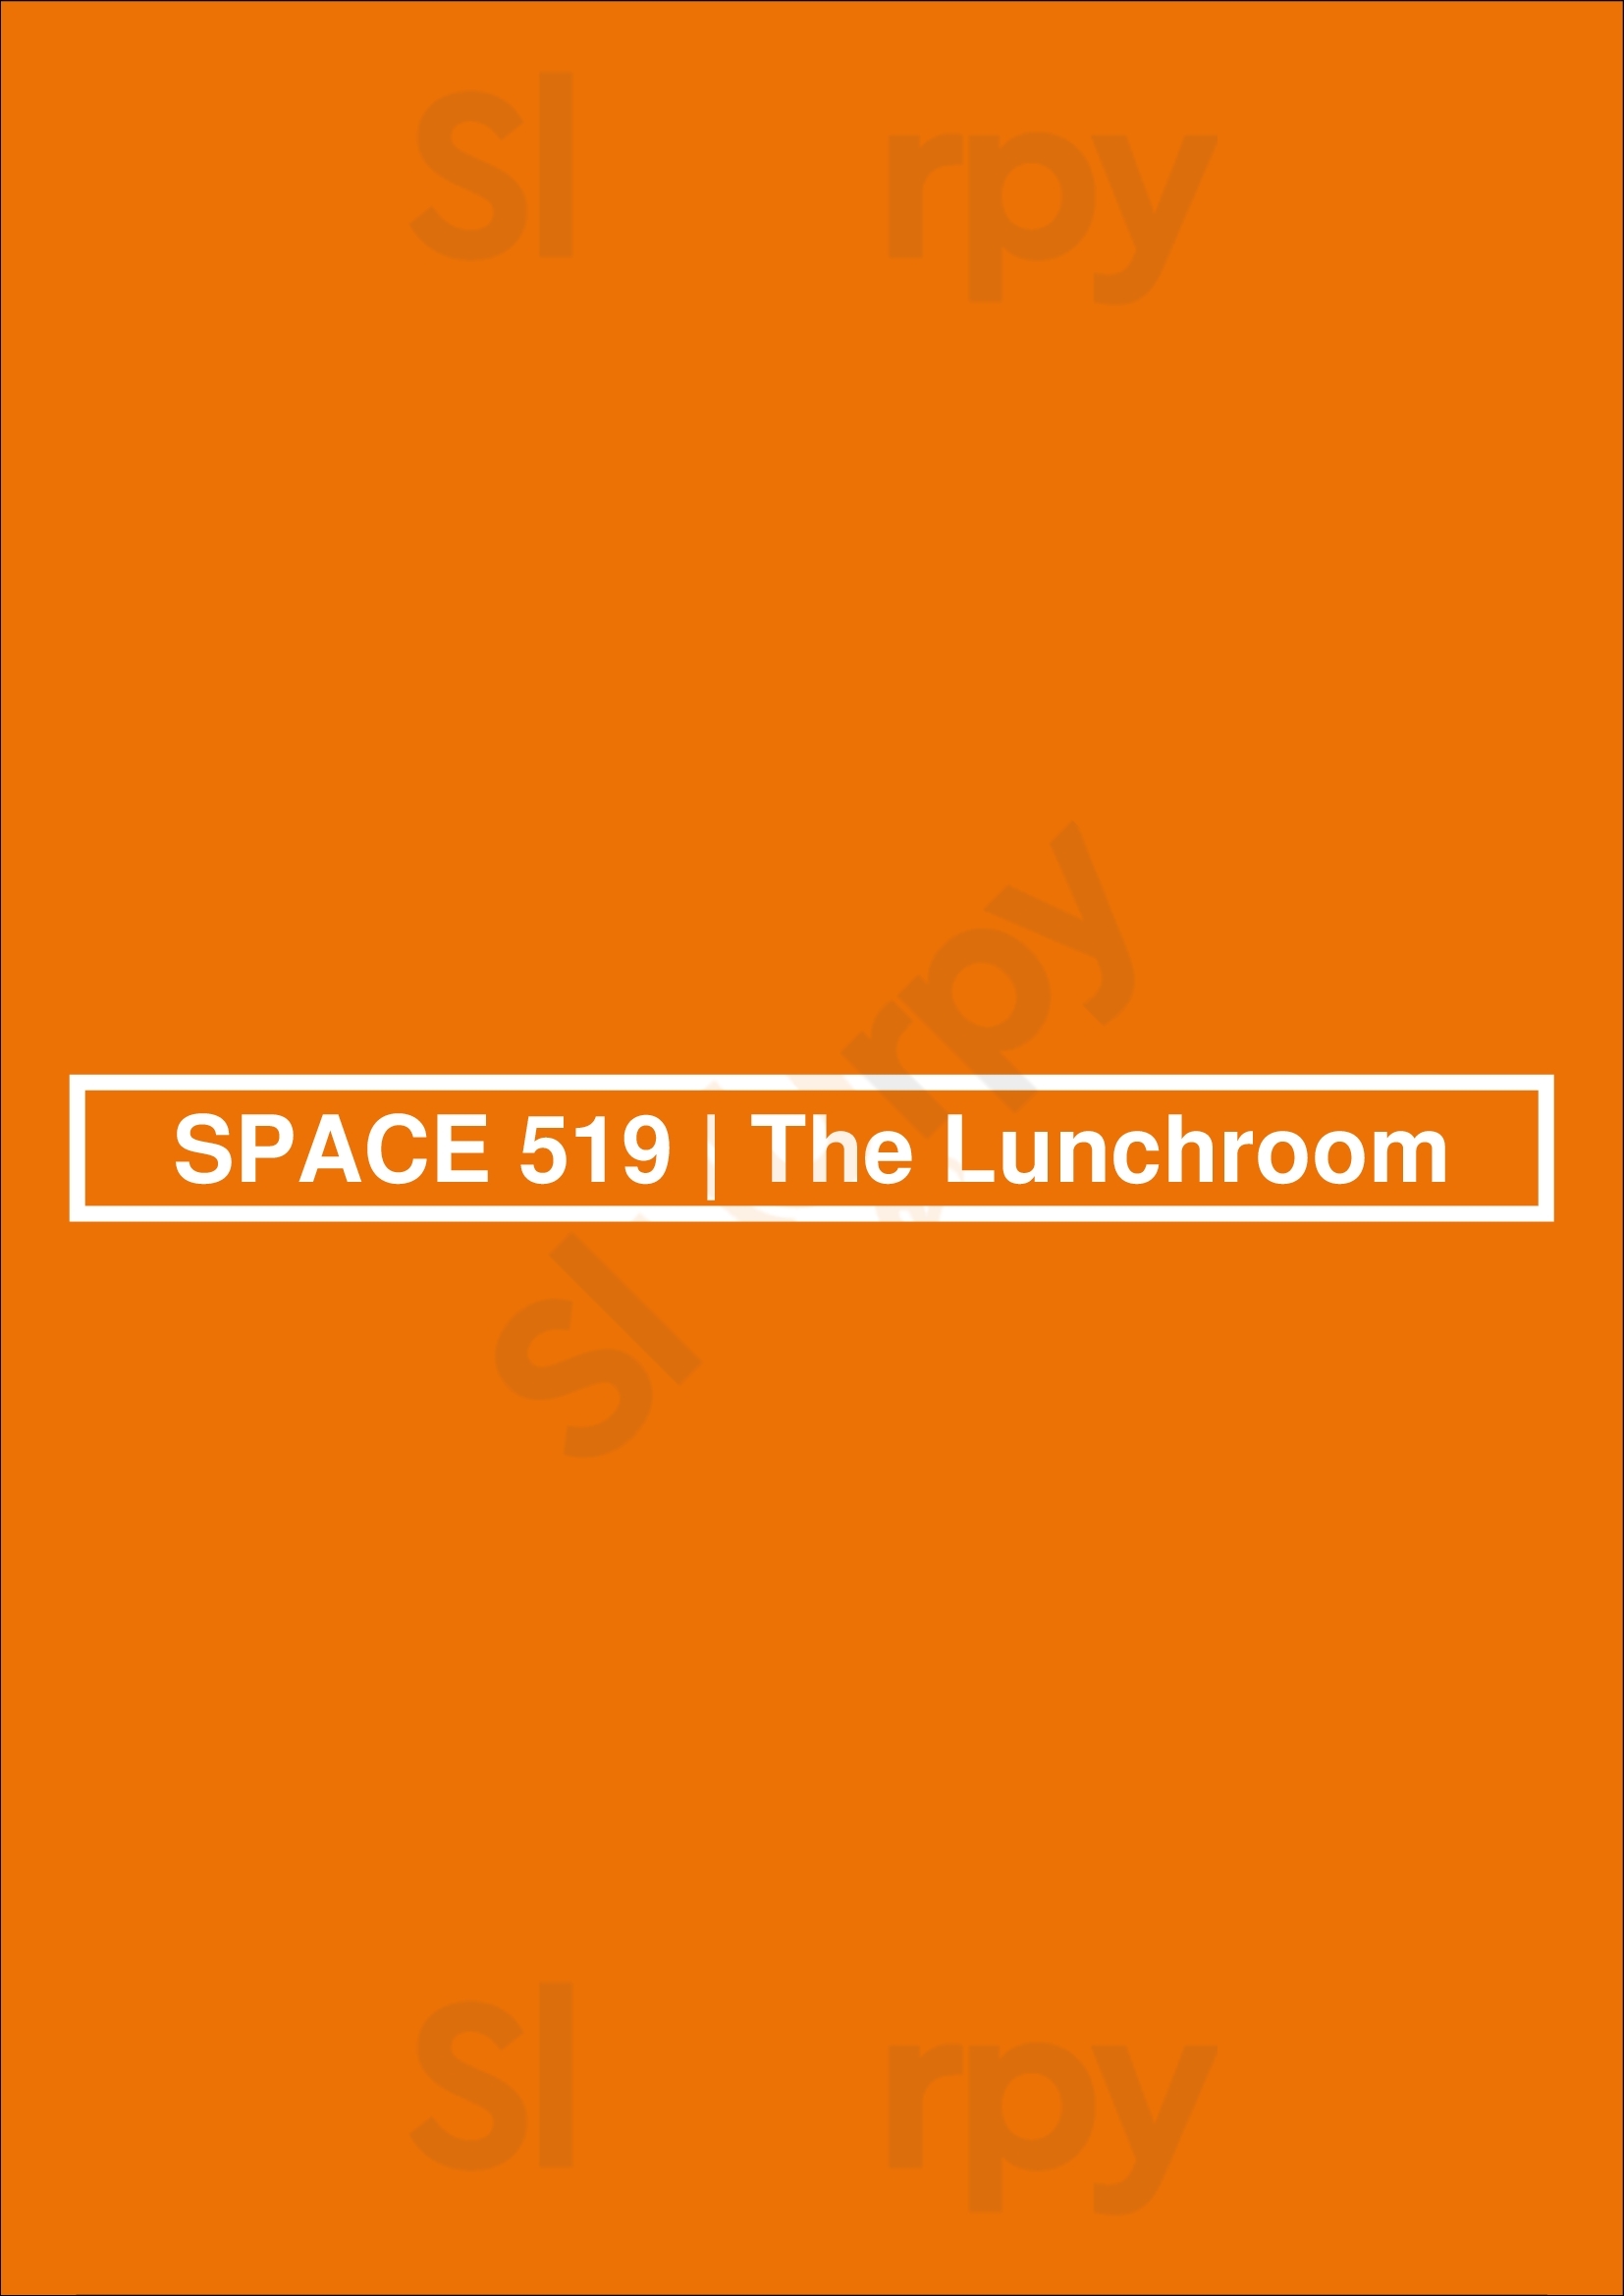 The Lunchroom Chicago Menu - 1